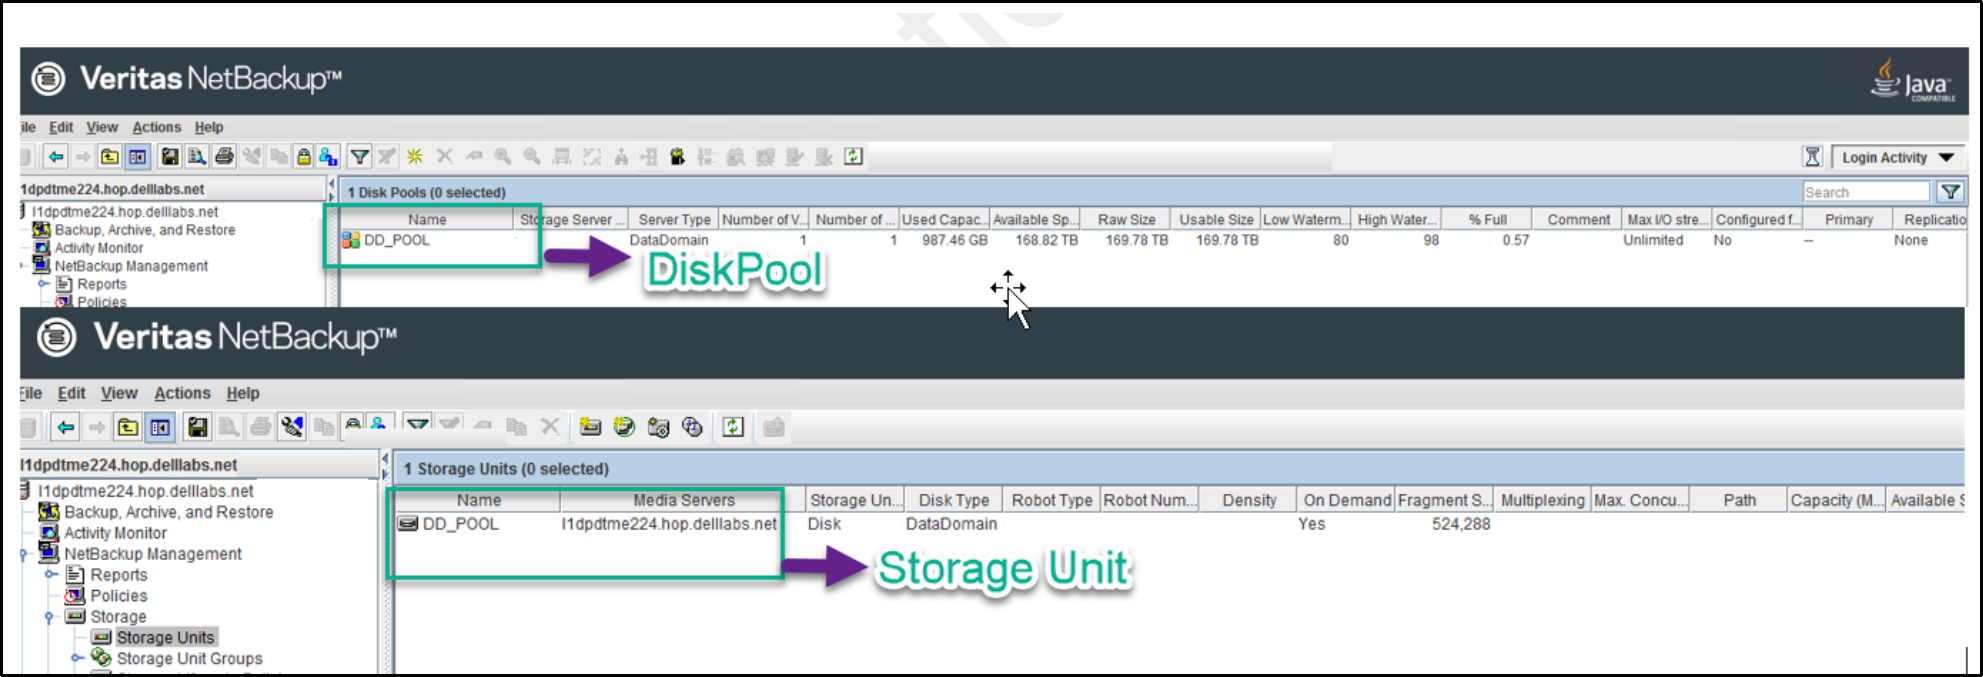 This image shows the successful creation of Disk Pool and Storage unit from NetBackup Console.